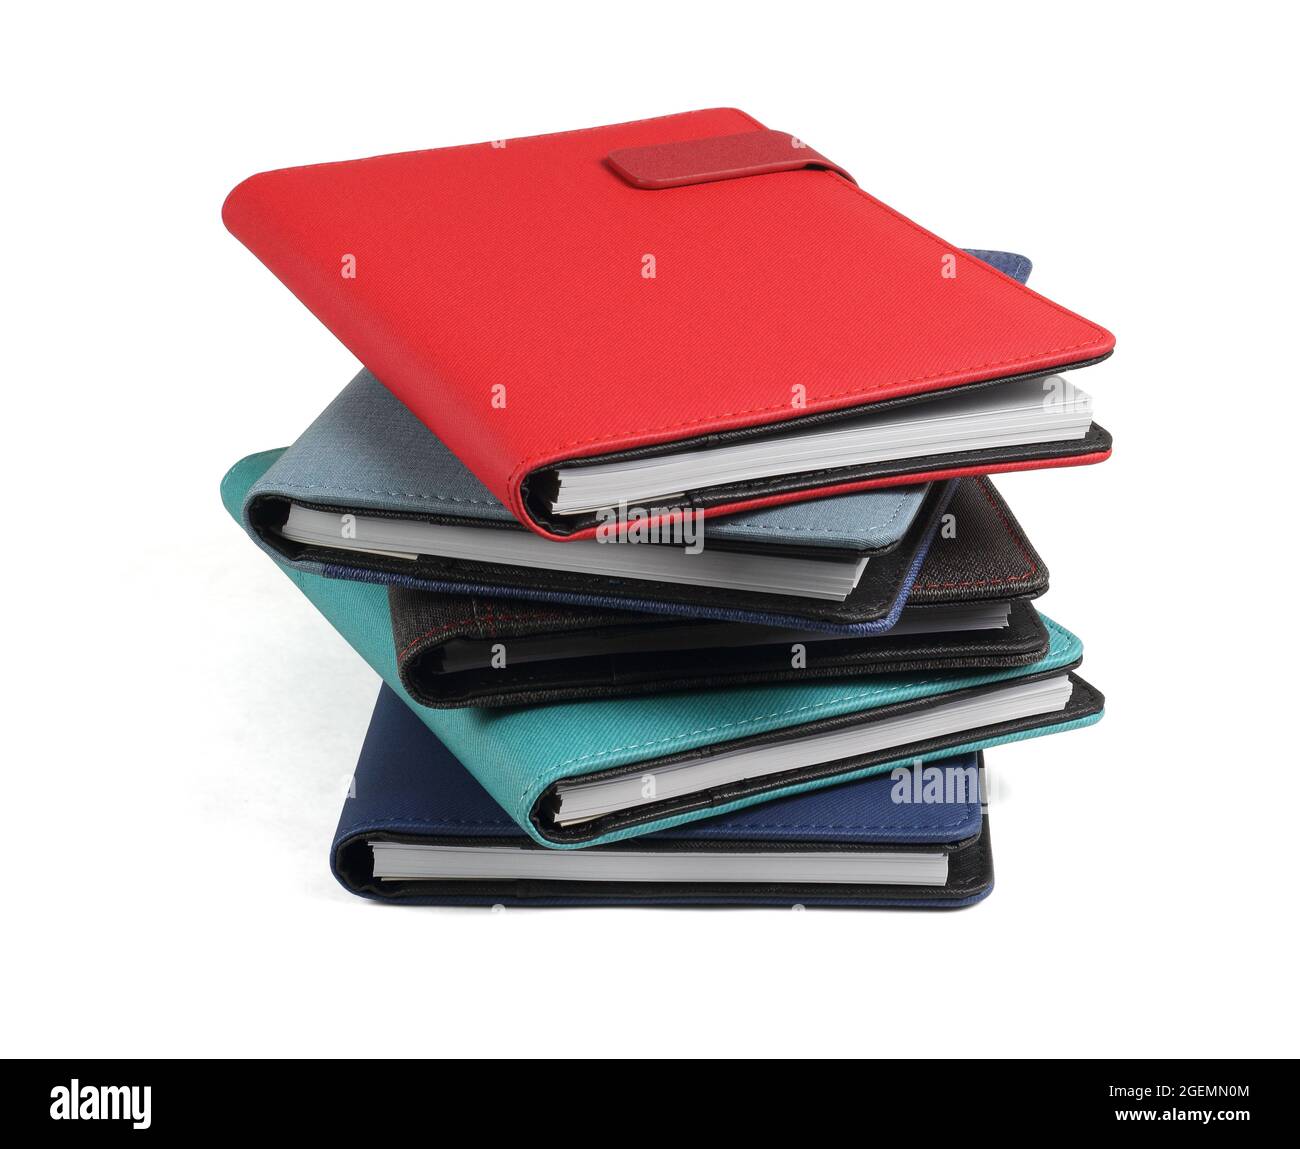 Stack of Colorful Diaries on White Background Stock Photo